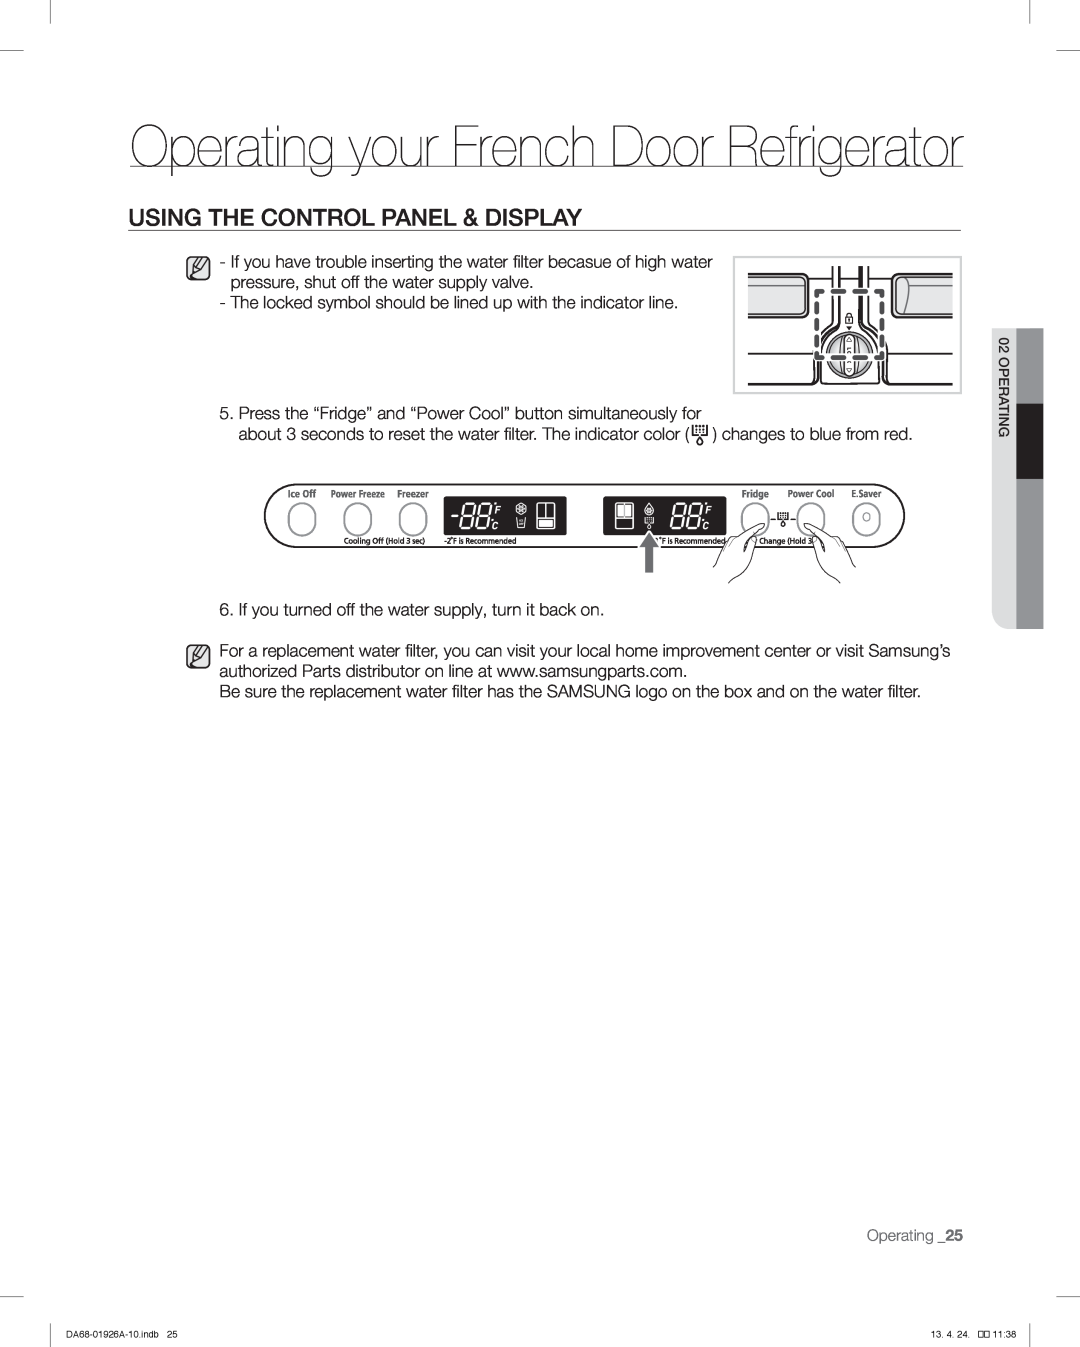 Samsung RFG293HAWP, RFG293HARS user manual Operating your French Door Refrigerator, Using The Control Panel & Display 